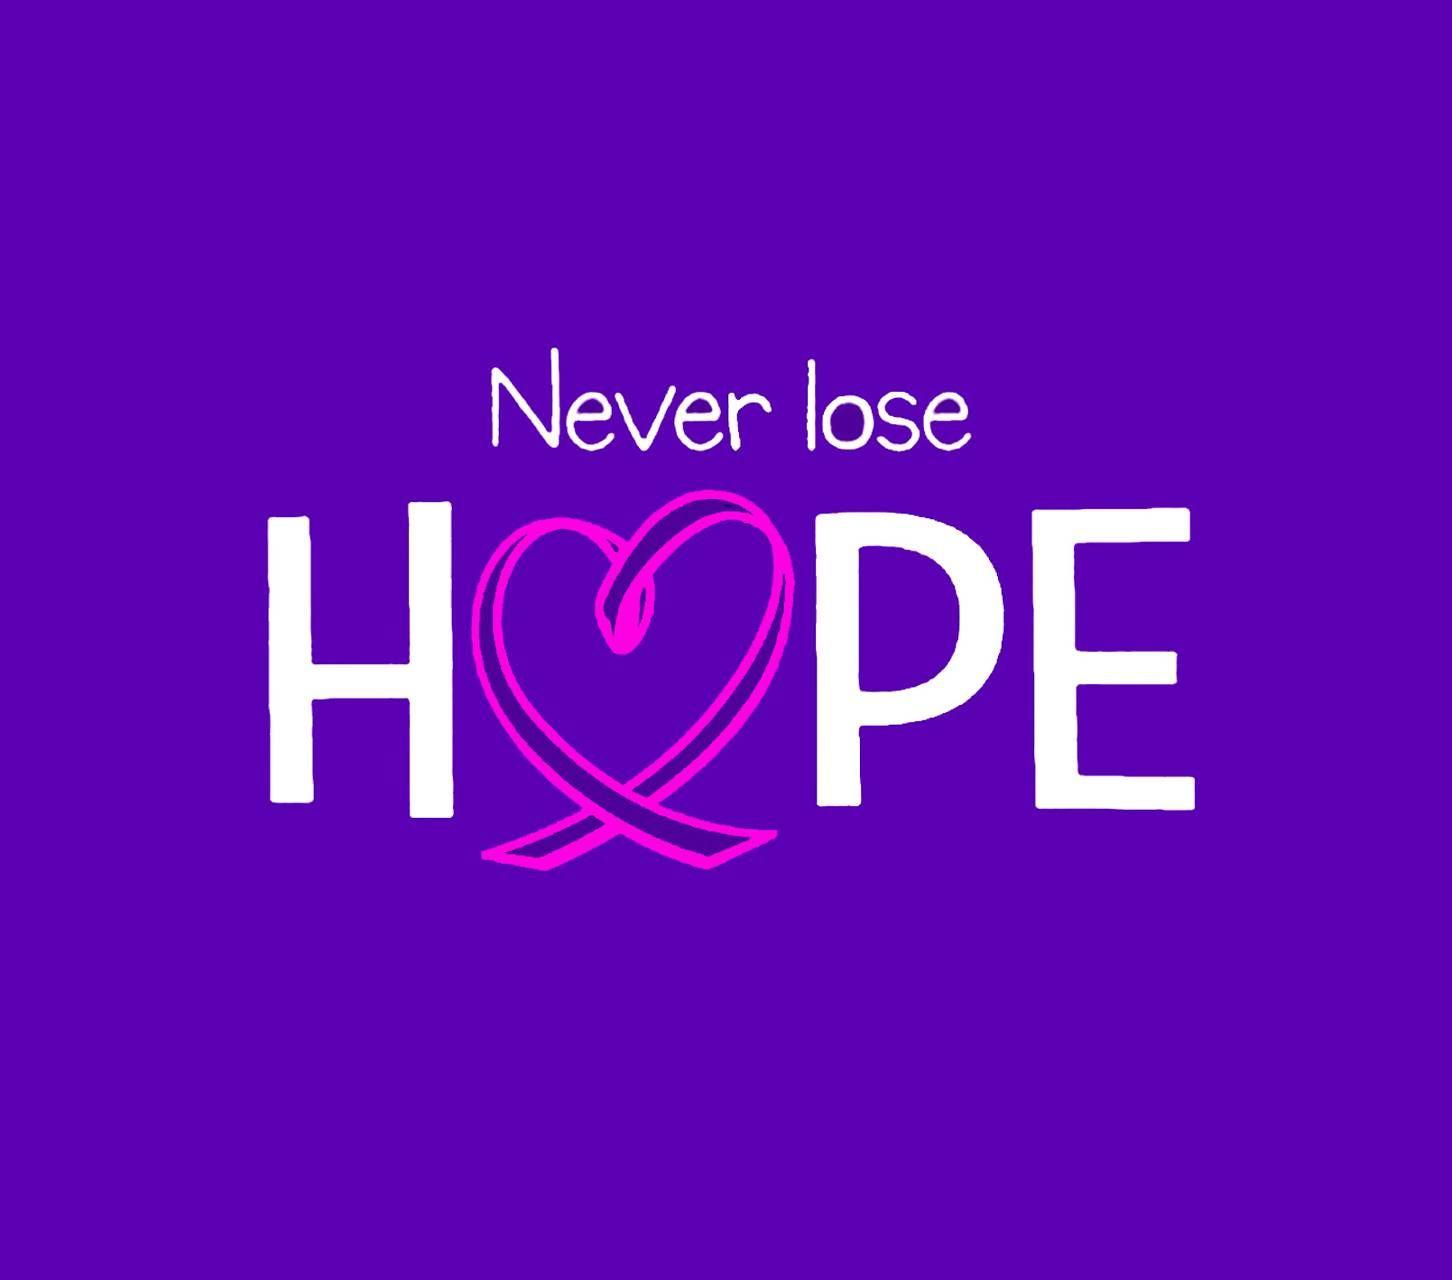 Motivational Wallpaper on Hope: Don't lose hope. you never know